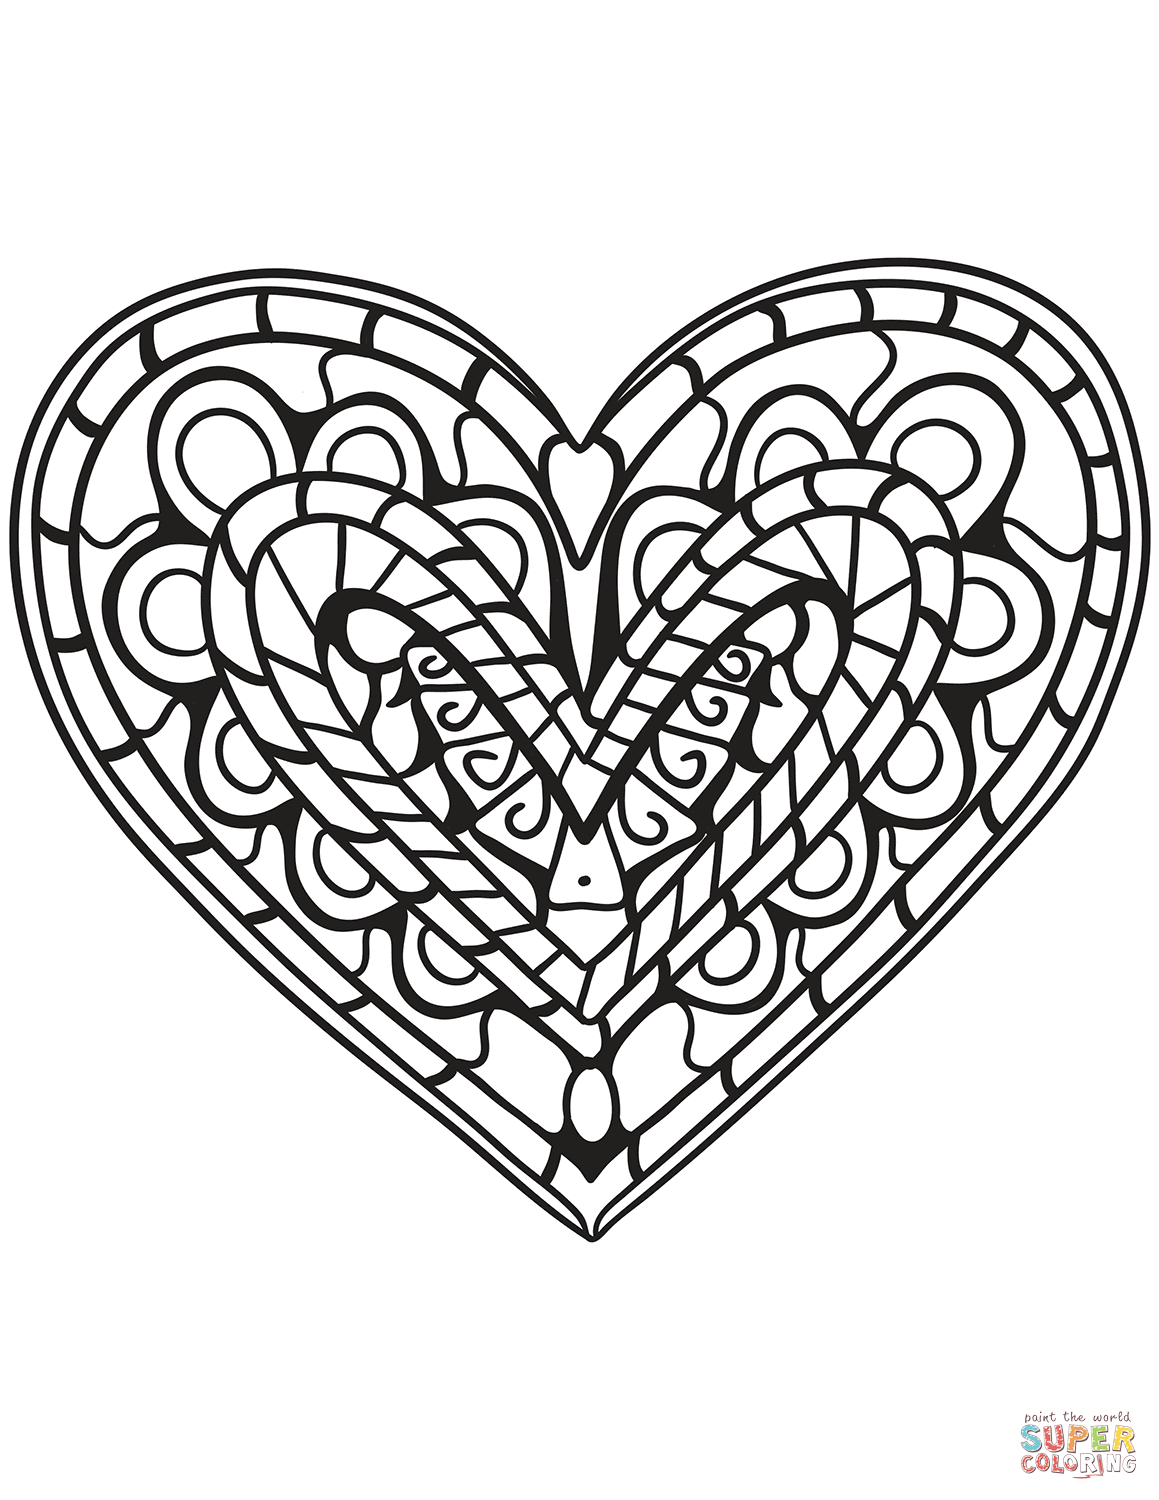 Heart Coloring Pages Pdf Heart Coloring Pages Free Printable Pictures